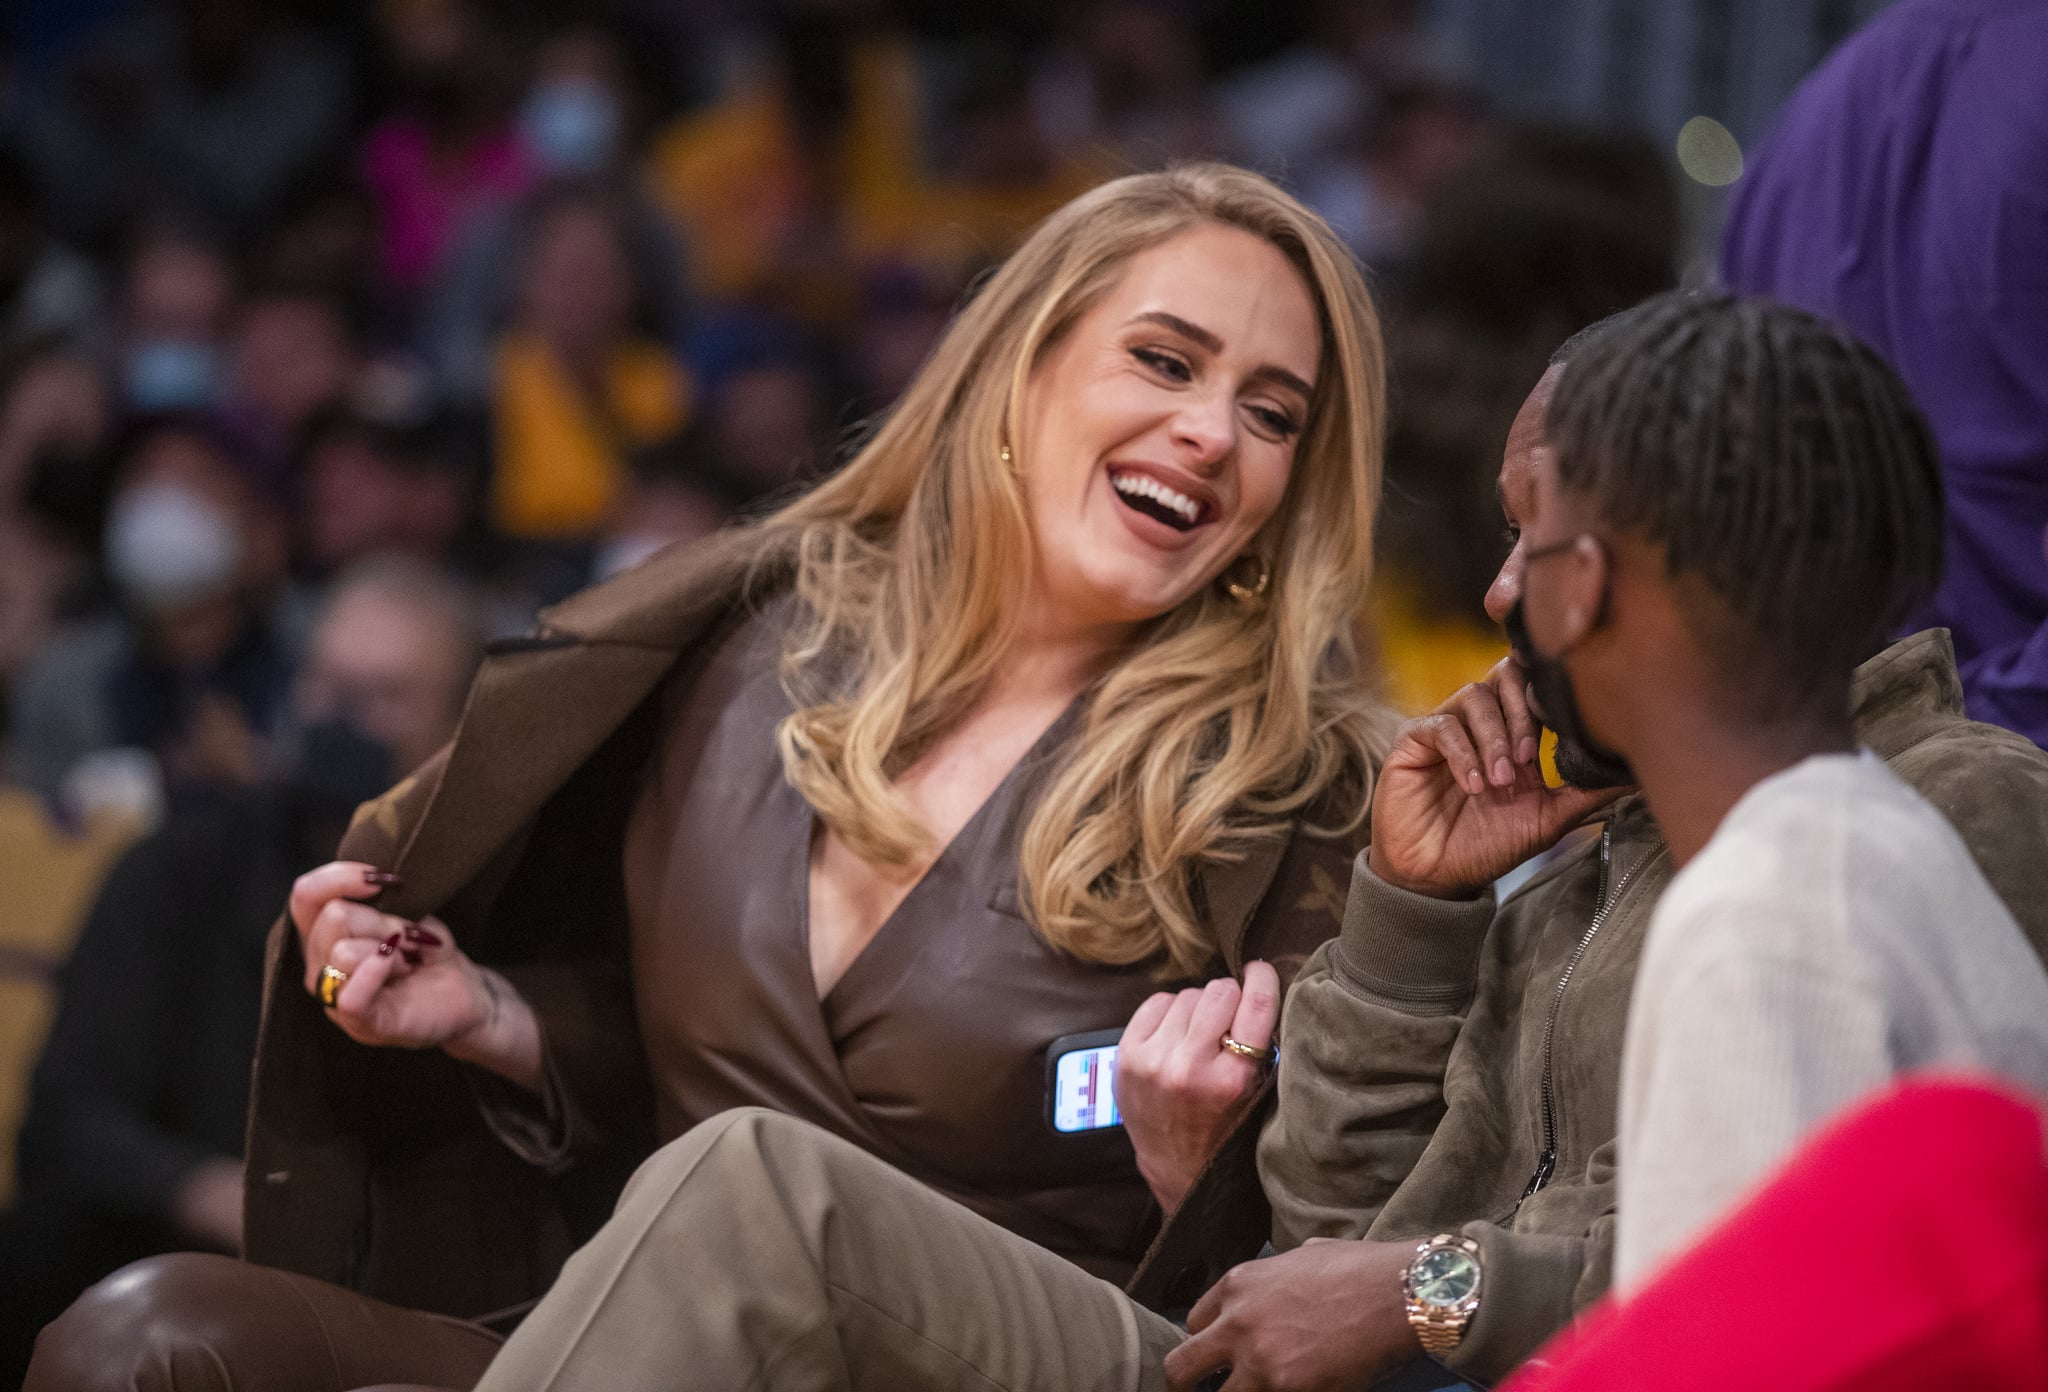 Of Course Adele Wore A Louis Vuitton Jacket To Last Night's Lakers Game